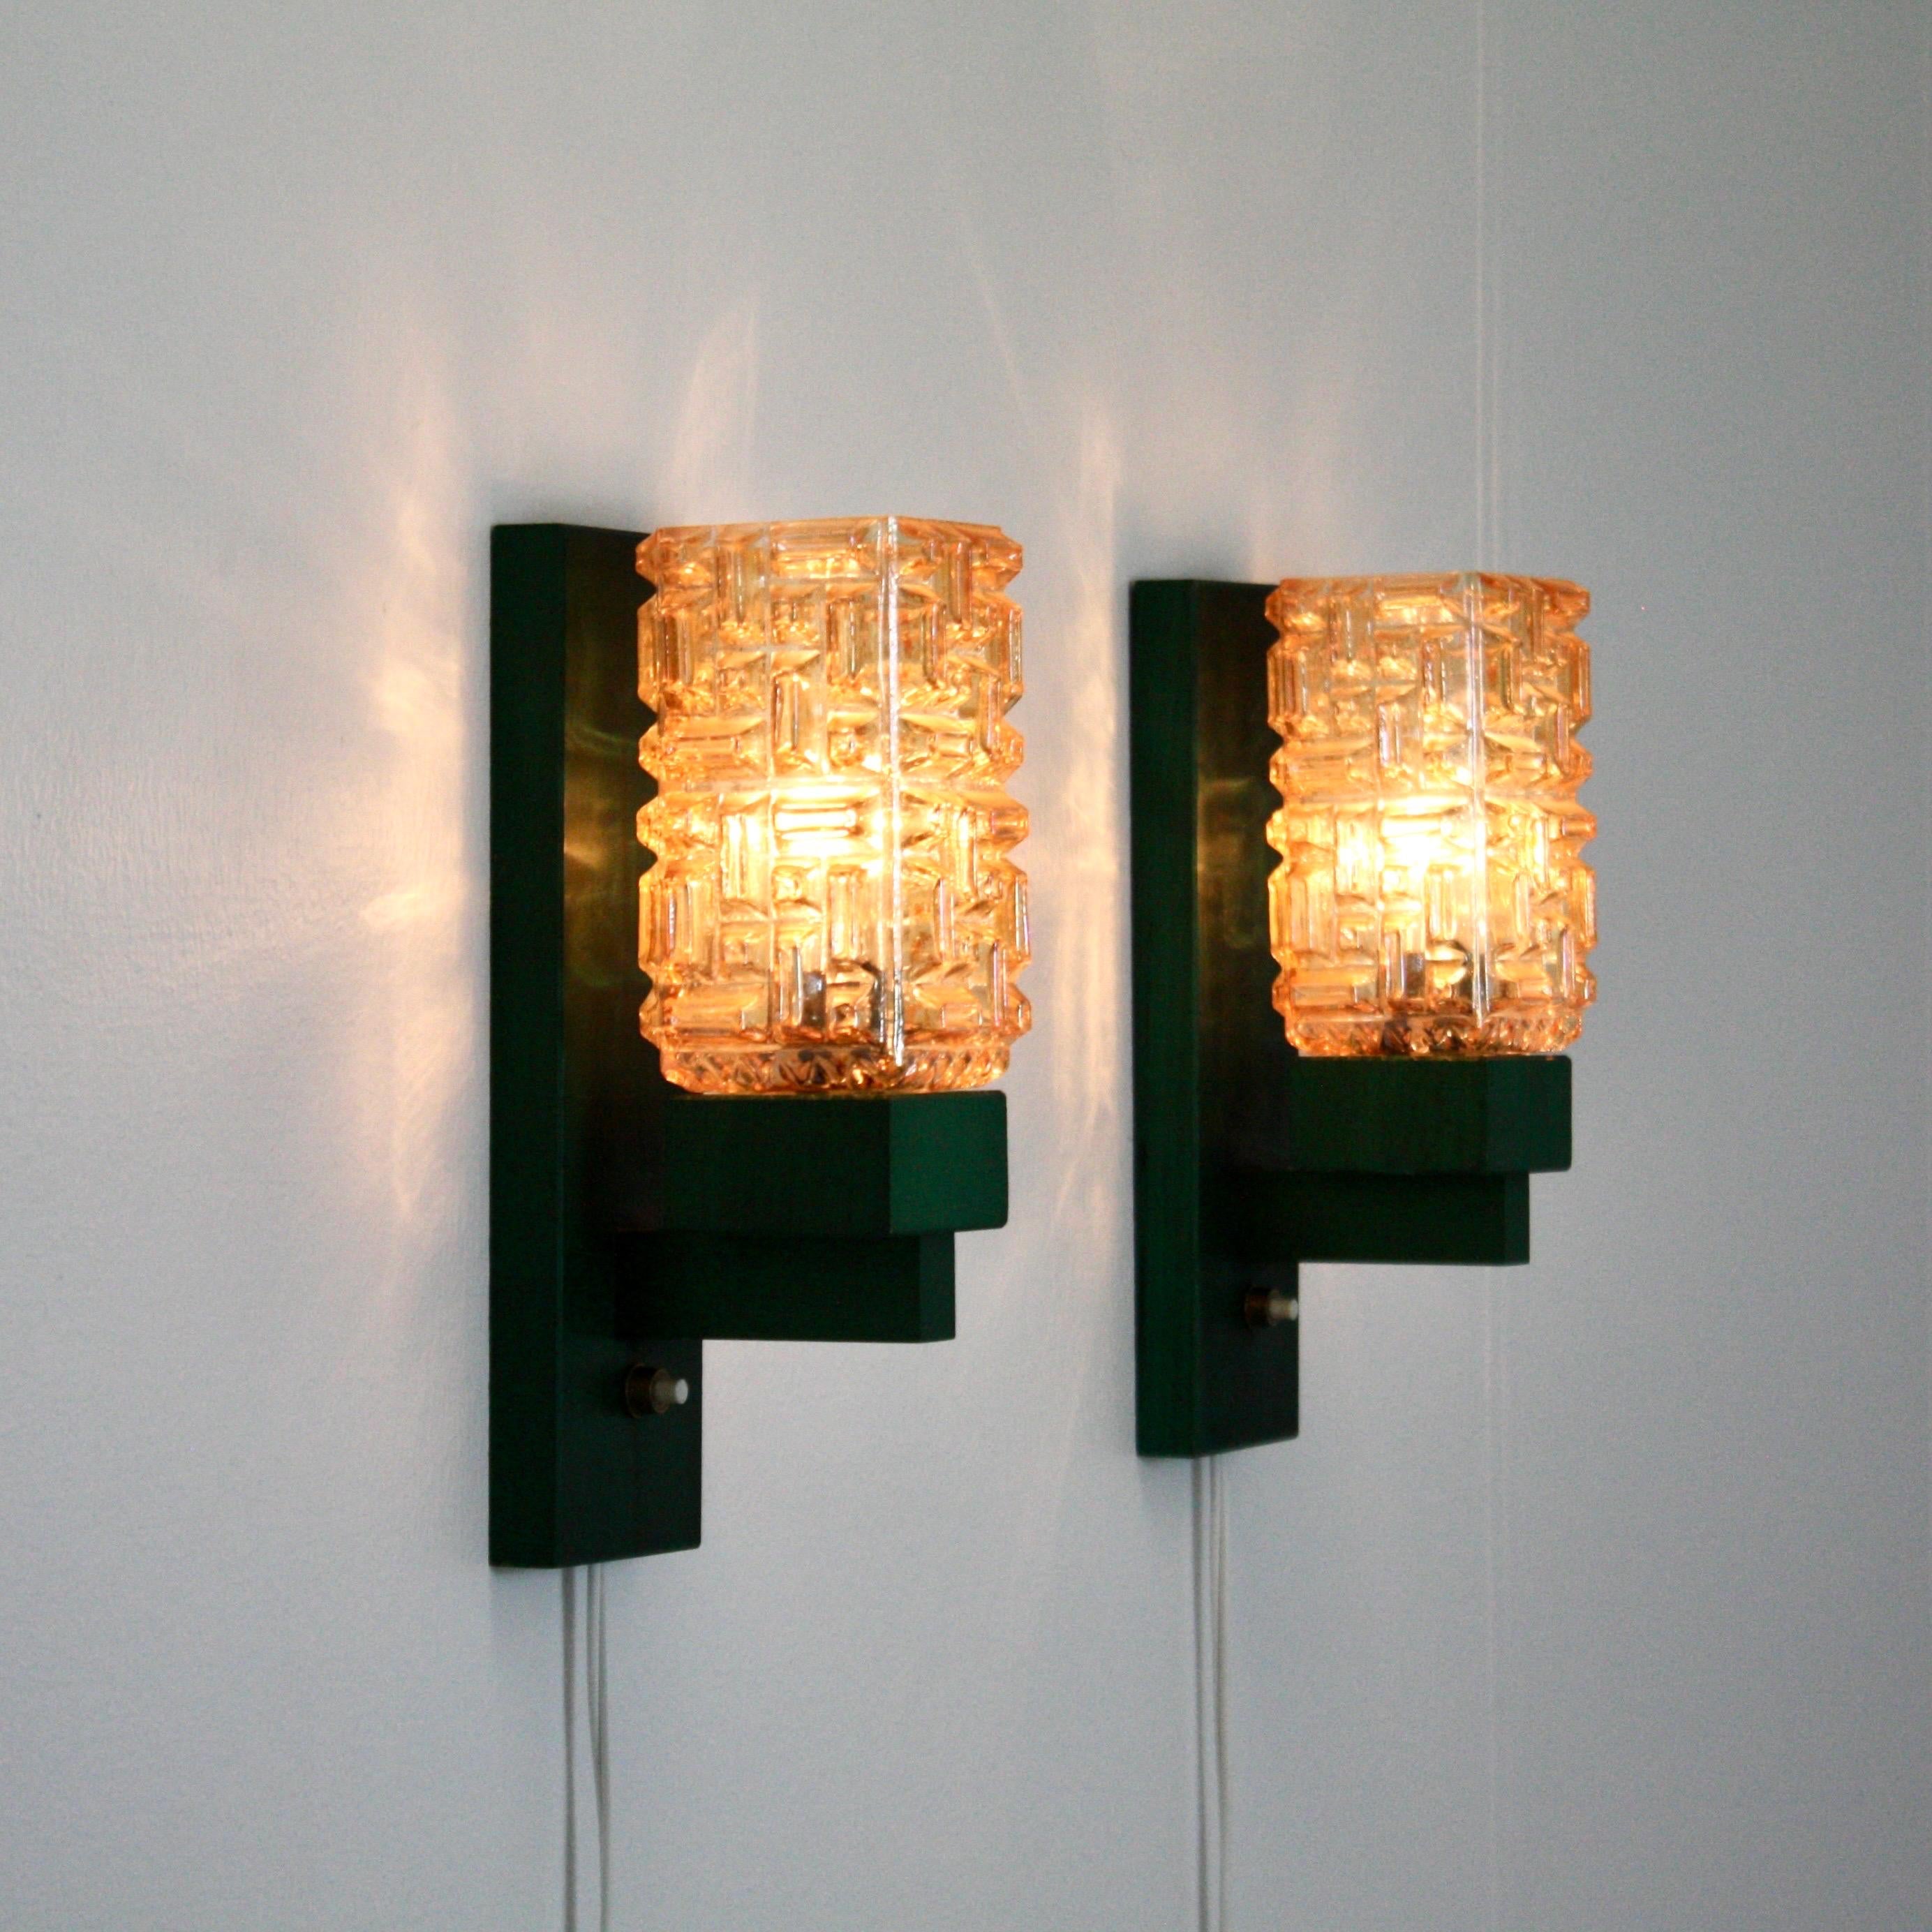 Exquisite set of Danish Modern wall lamps in green stained Scandinavian beech wood and amber colored glass shades. The sconces were made in the 1970s by the Danish workshop 'Vitrika'. 

* A set (2) green stained wood wall lamps with amber glass